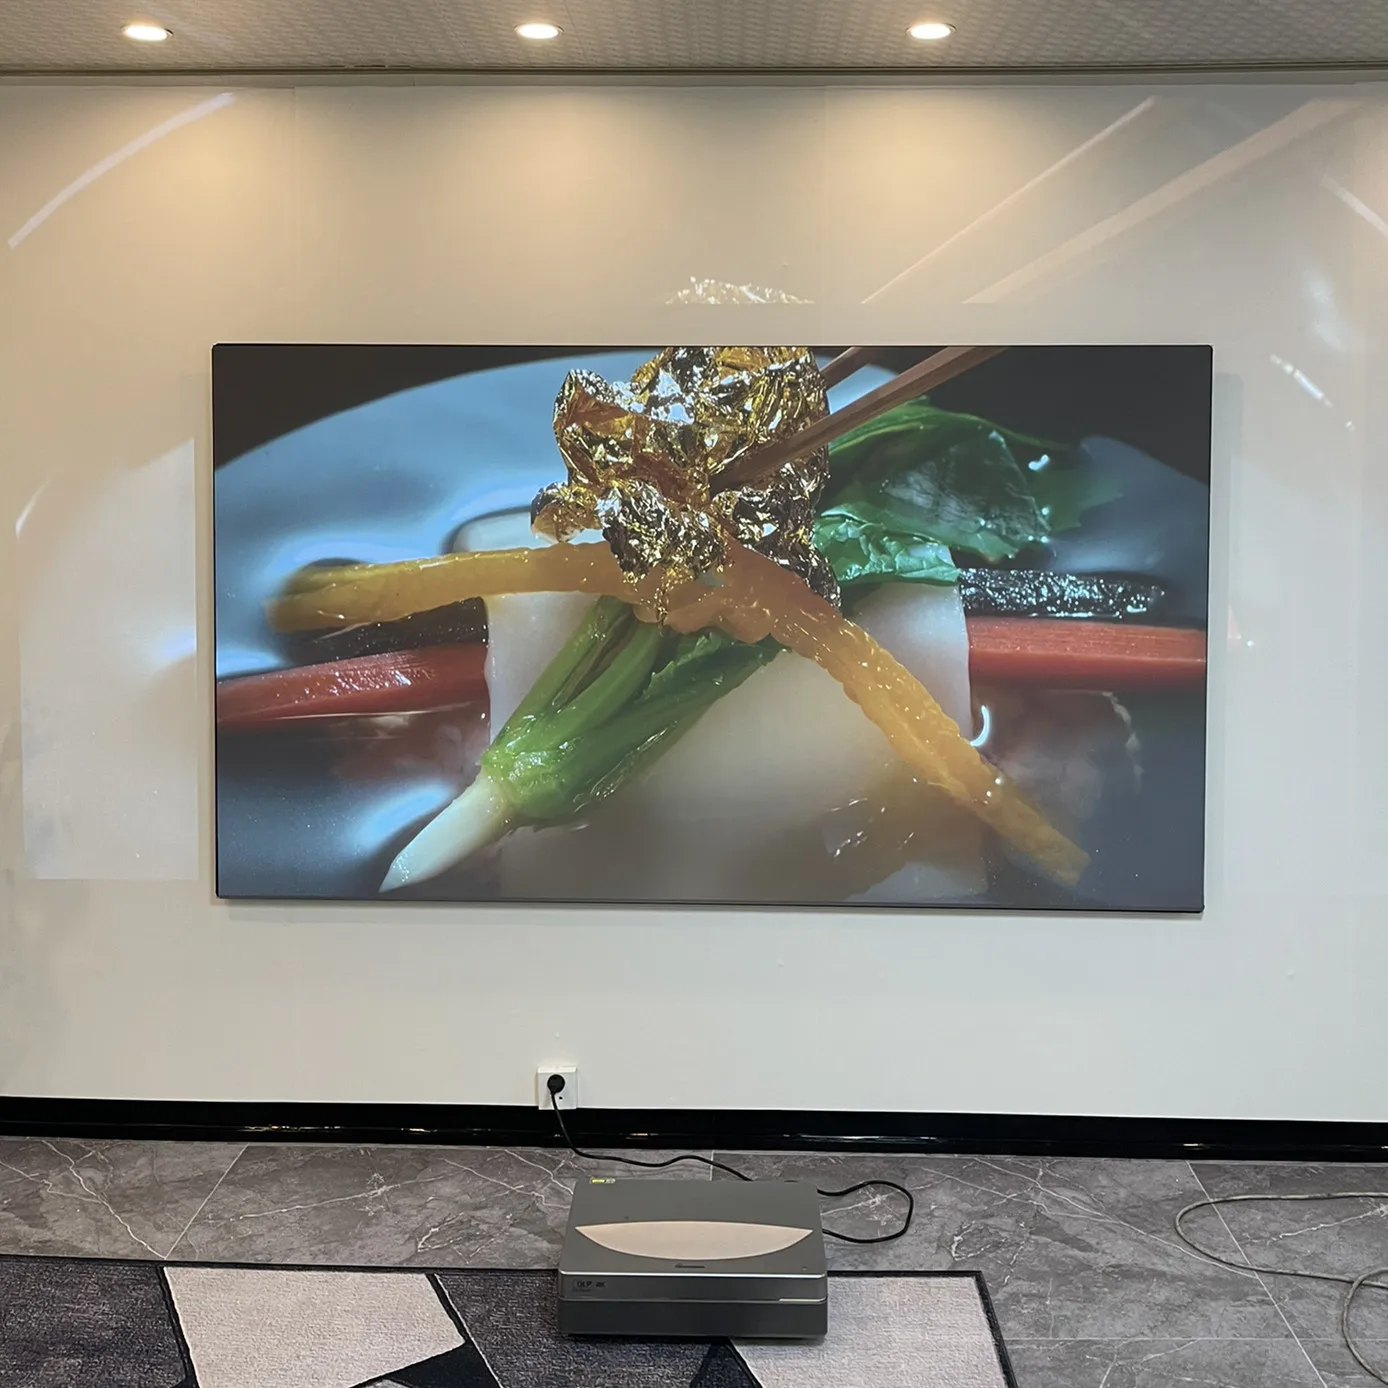 100-120 Inch Fresnel Anti-Light Giant Projection Screen with 0.5mm Flexible Diaphragm Roll Up to Go For UST Projector Laser TV energetic pei flexible build plate ender 6 bed 290x290mm removal spring steel sheet heat bed applied pei surface with base